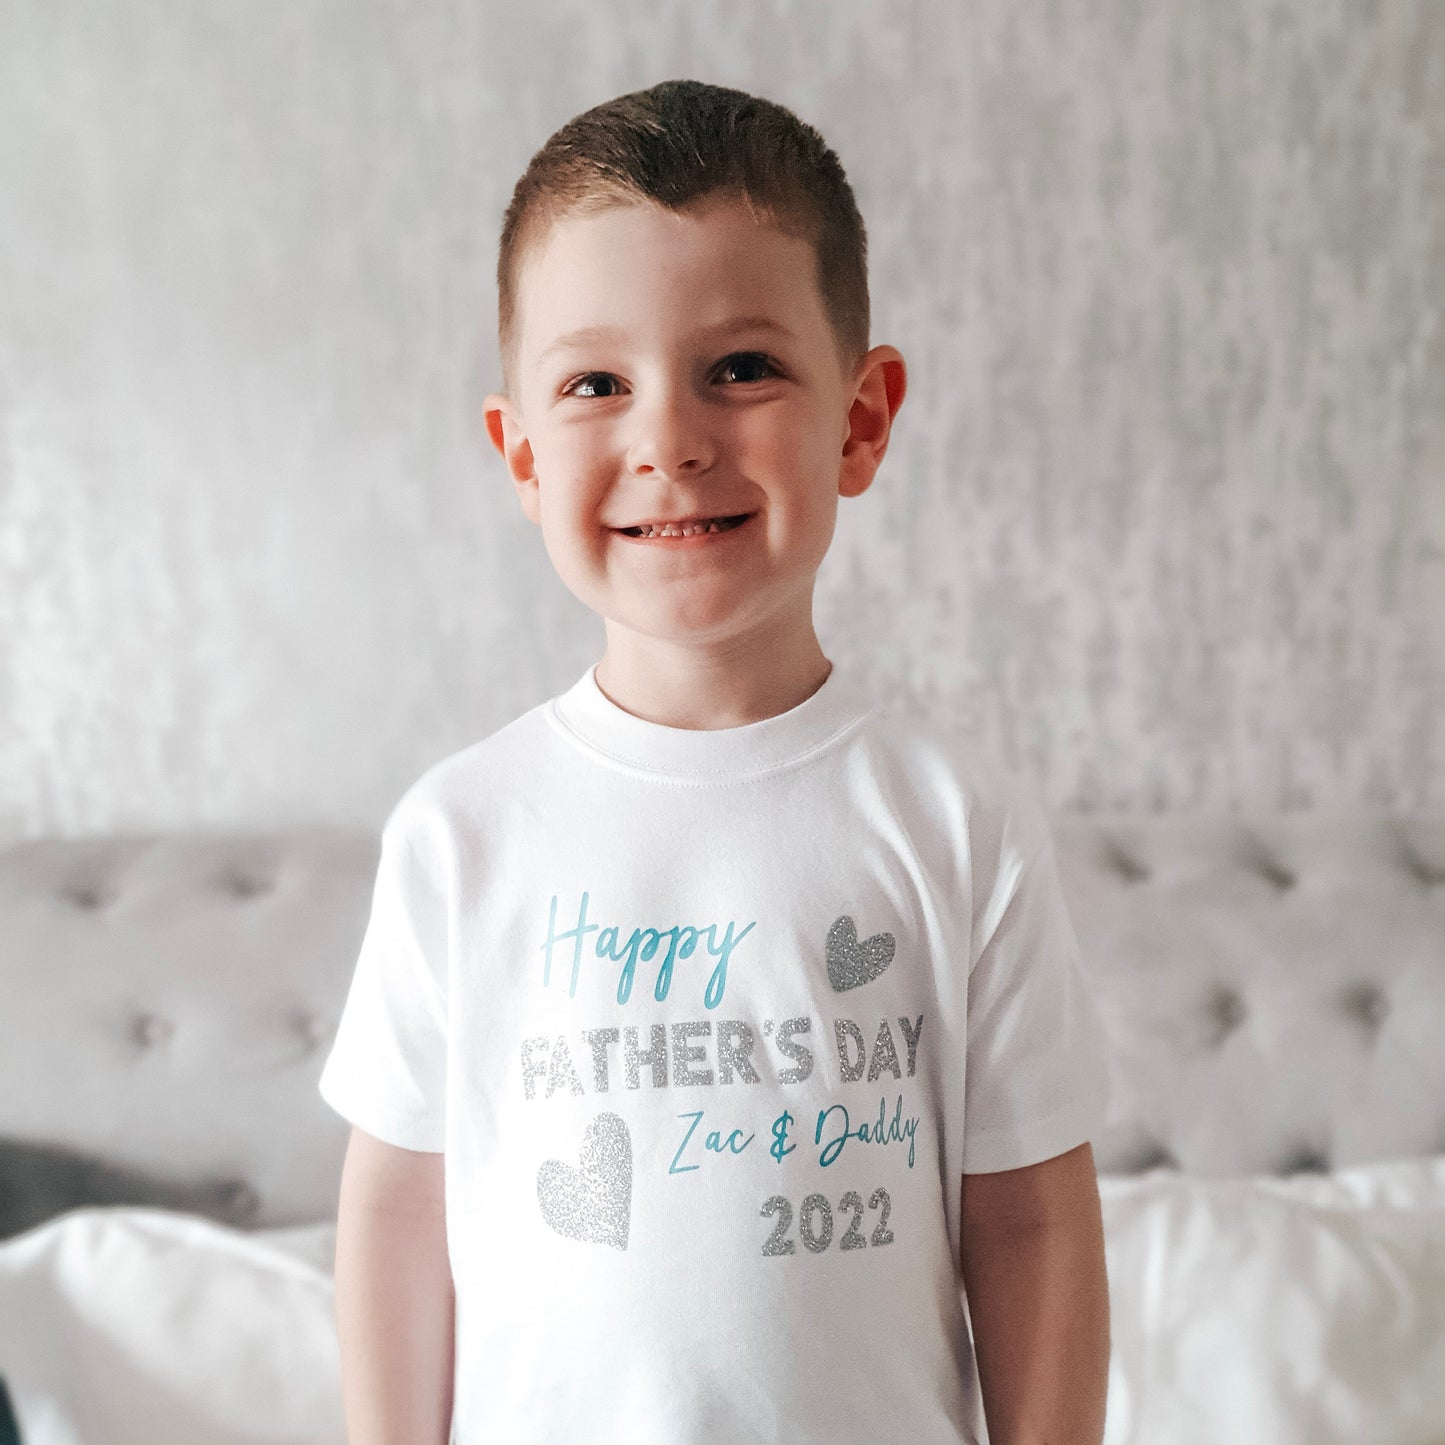 Happy Father's Day Hearts T-Shirt